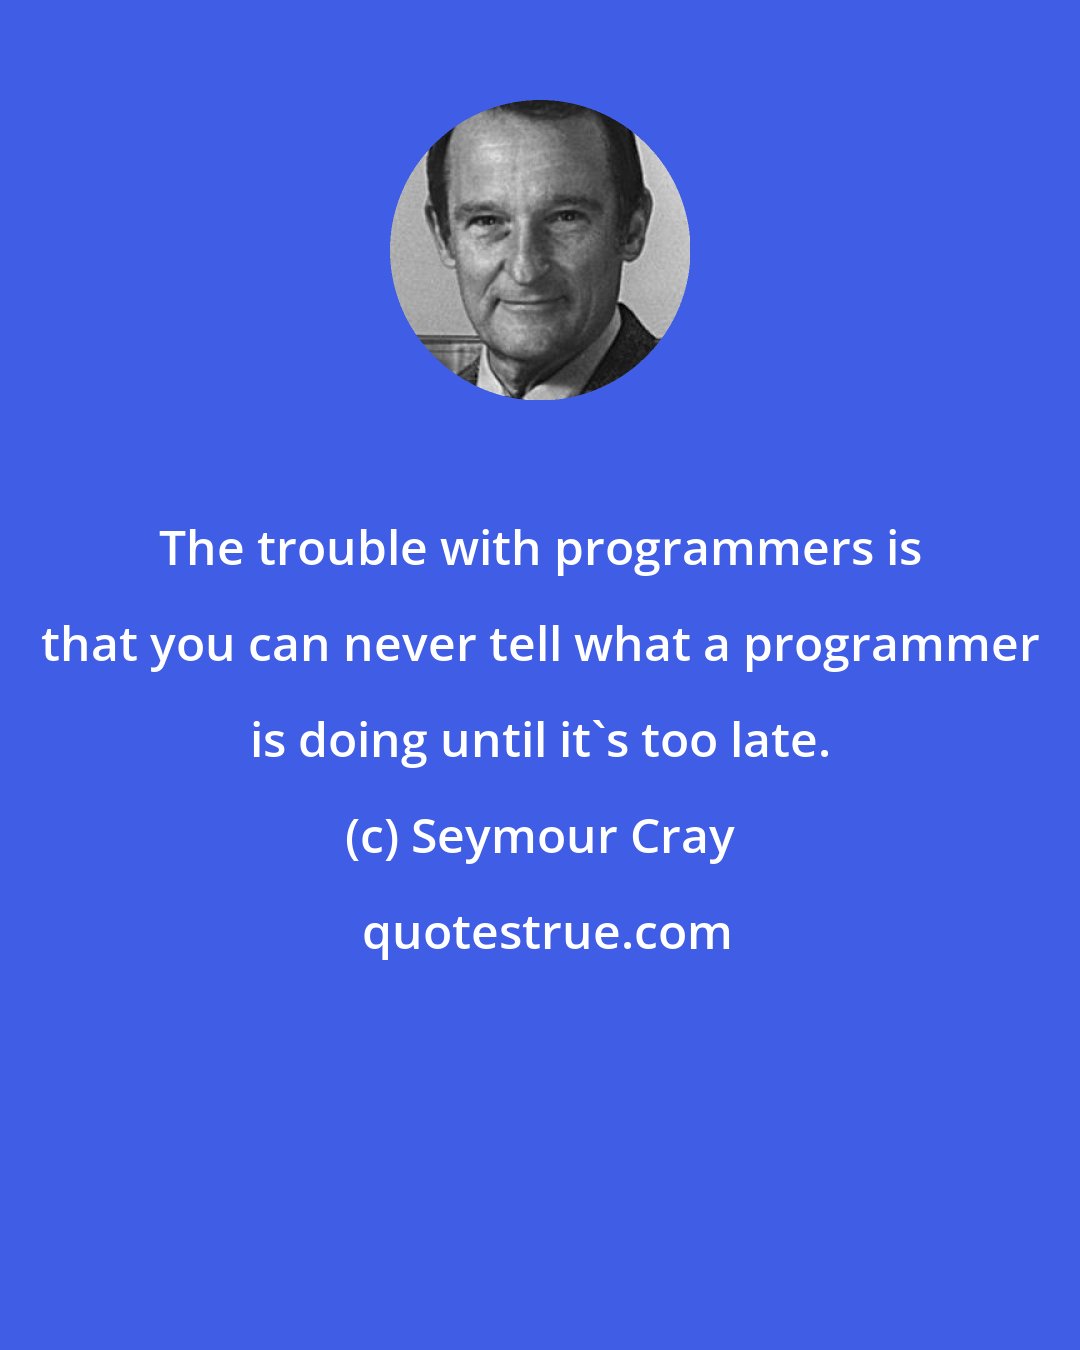 Seymour Cray: The trouble with programmers is that you can never tell what a programmer is doing until it's too late.